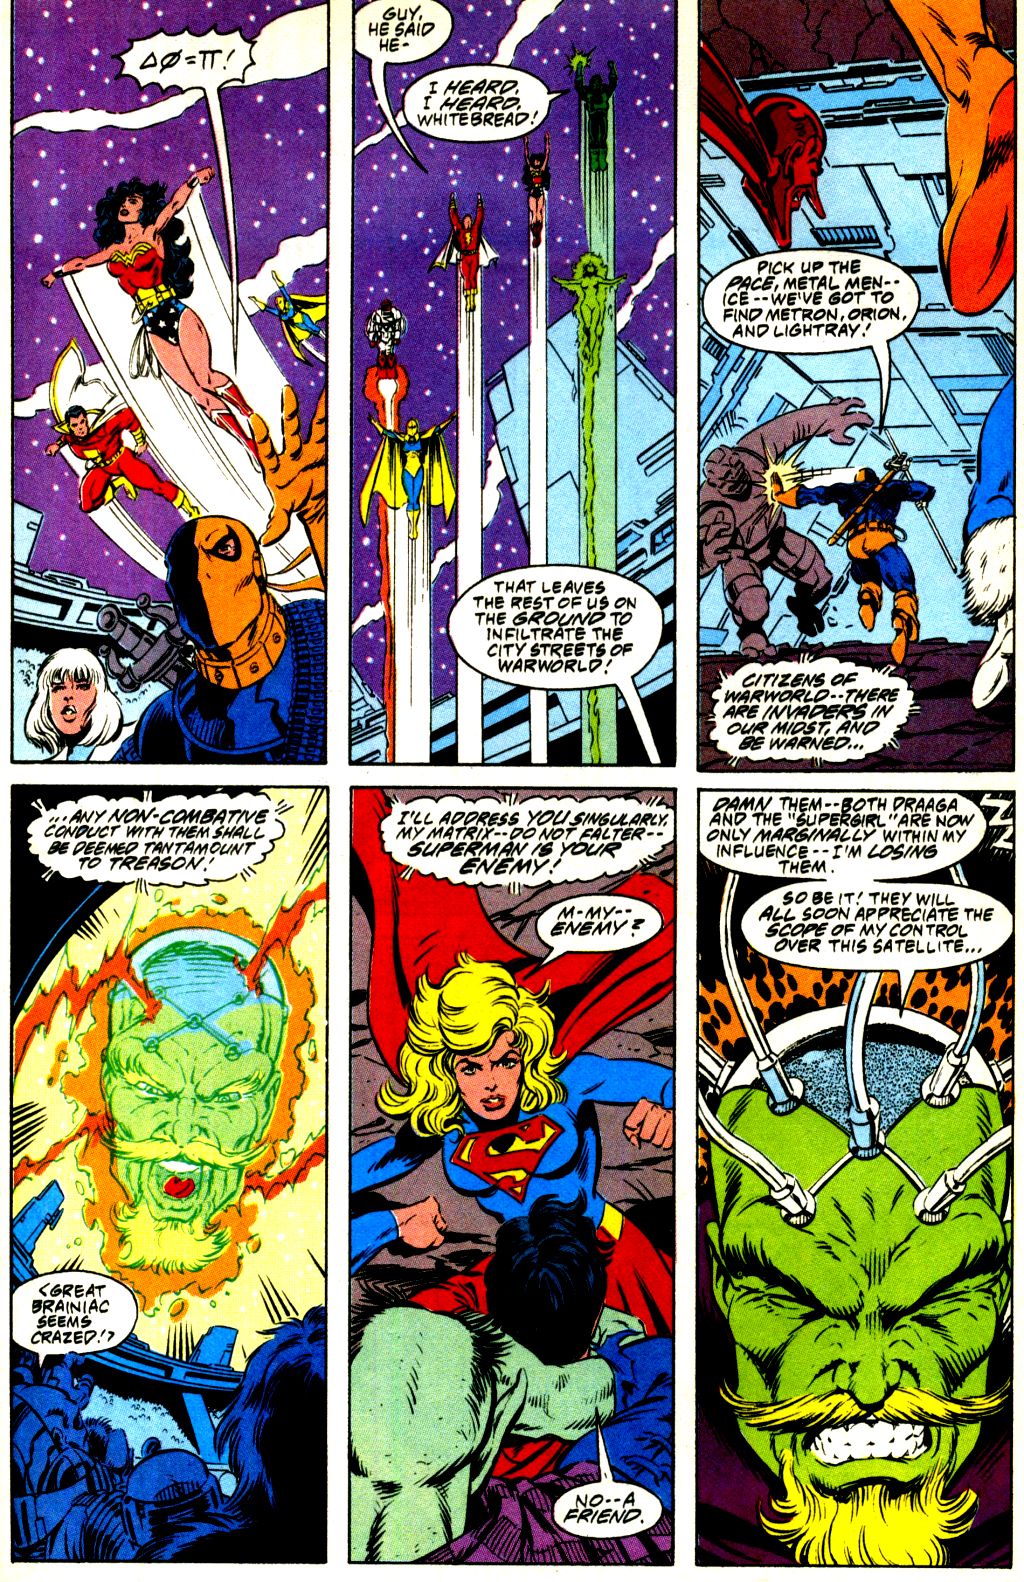 Keeps up with Fire, Wonder Woman, Doctor Fate and Guy Gardner